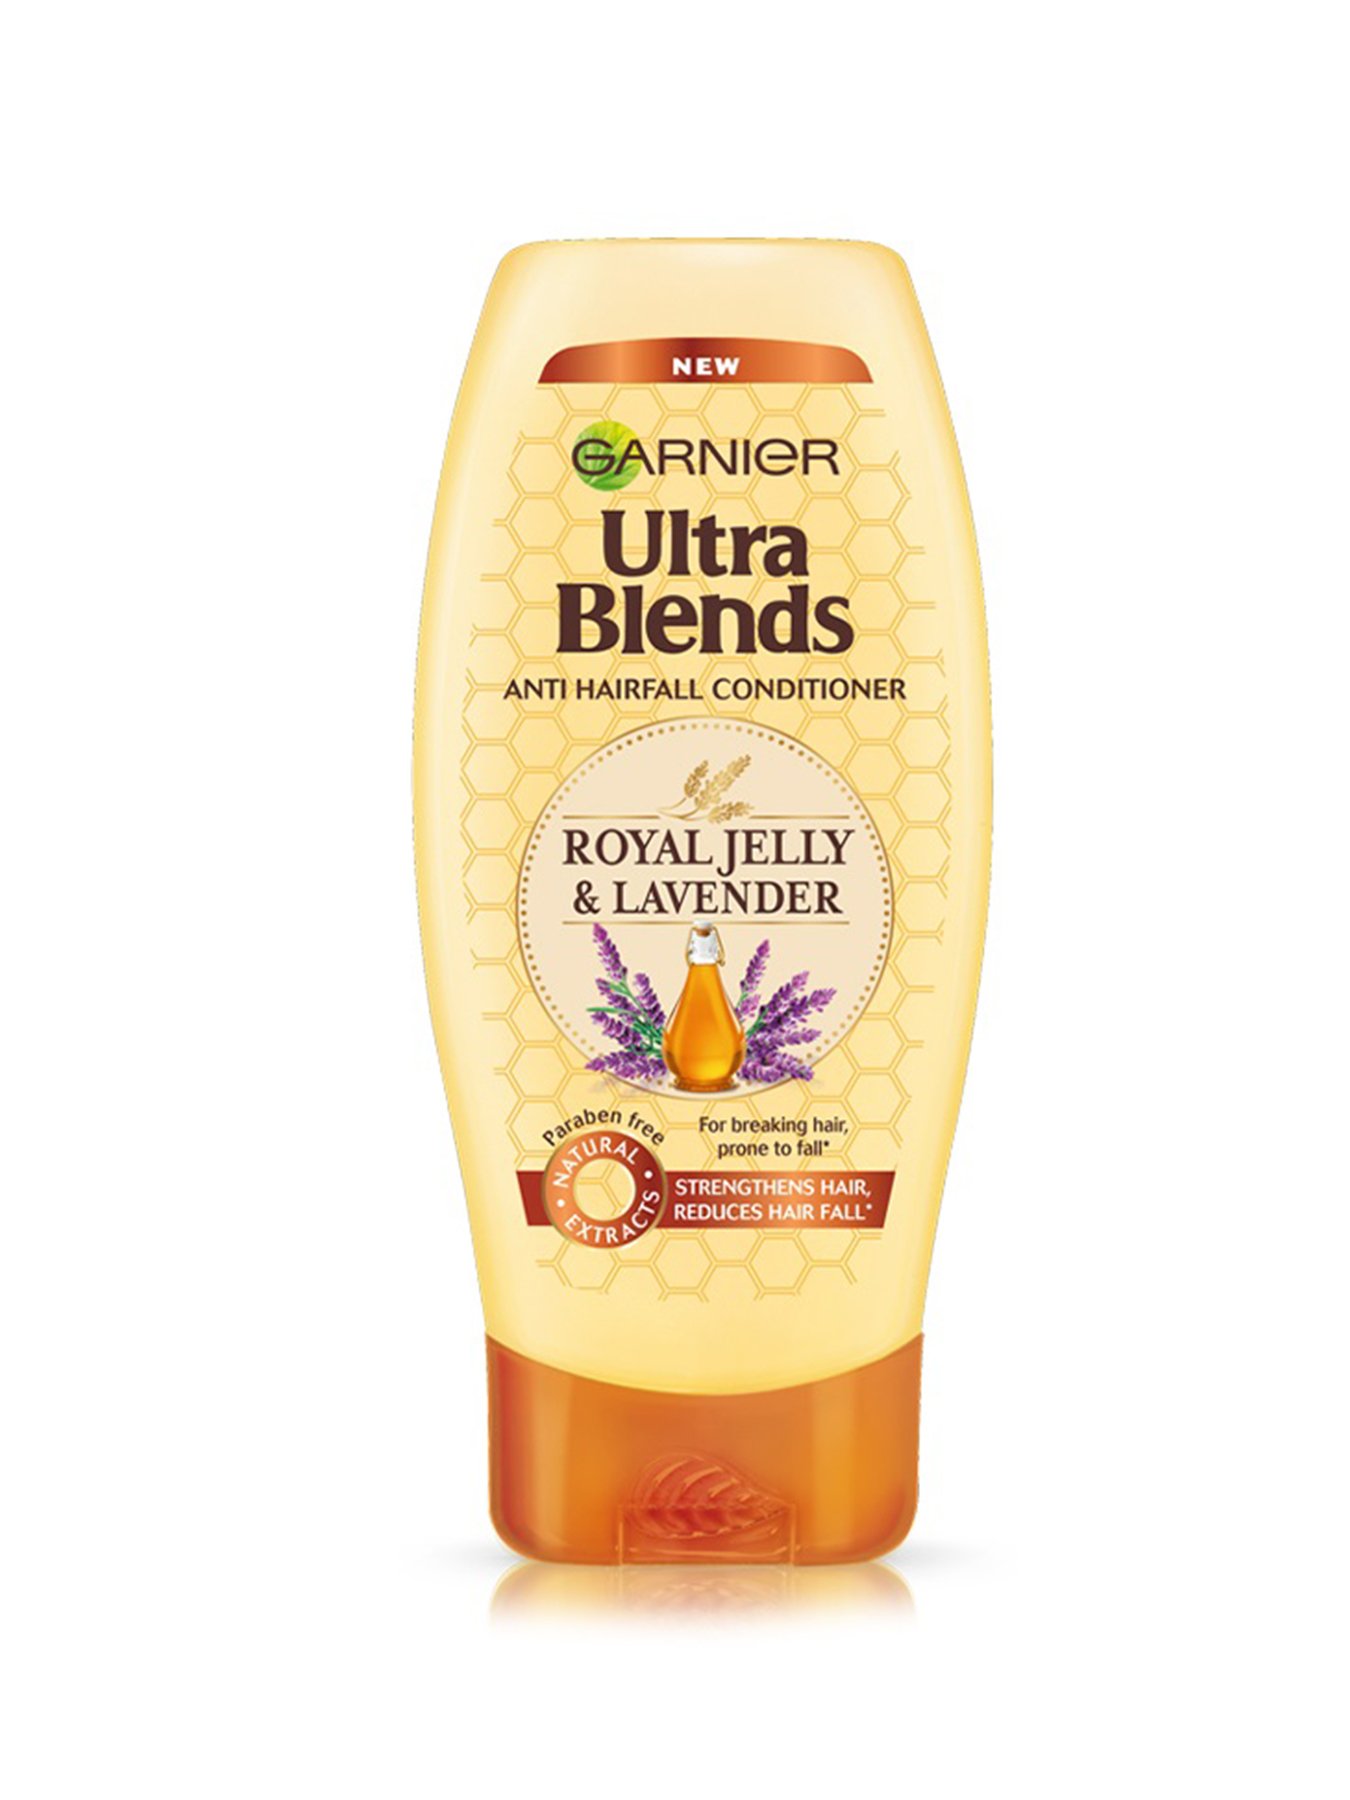 Garnier Ultra Blends Royal Jelly and Lavender Conditioner 75ml